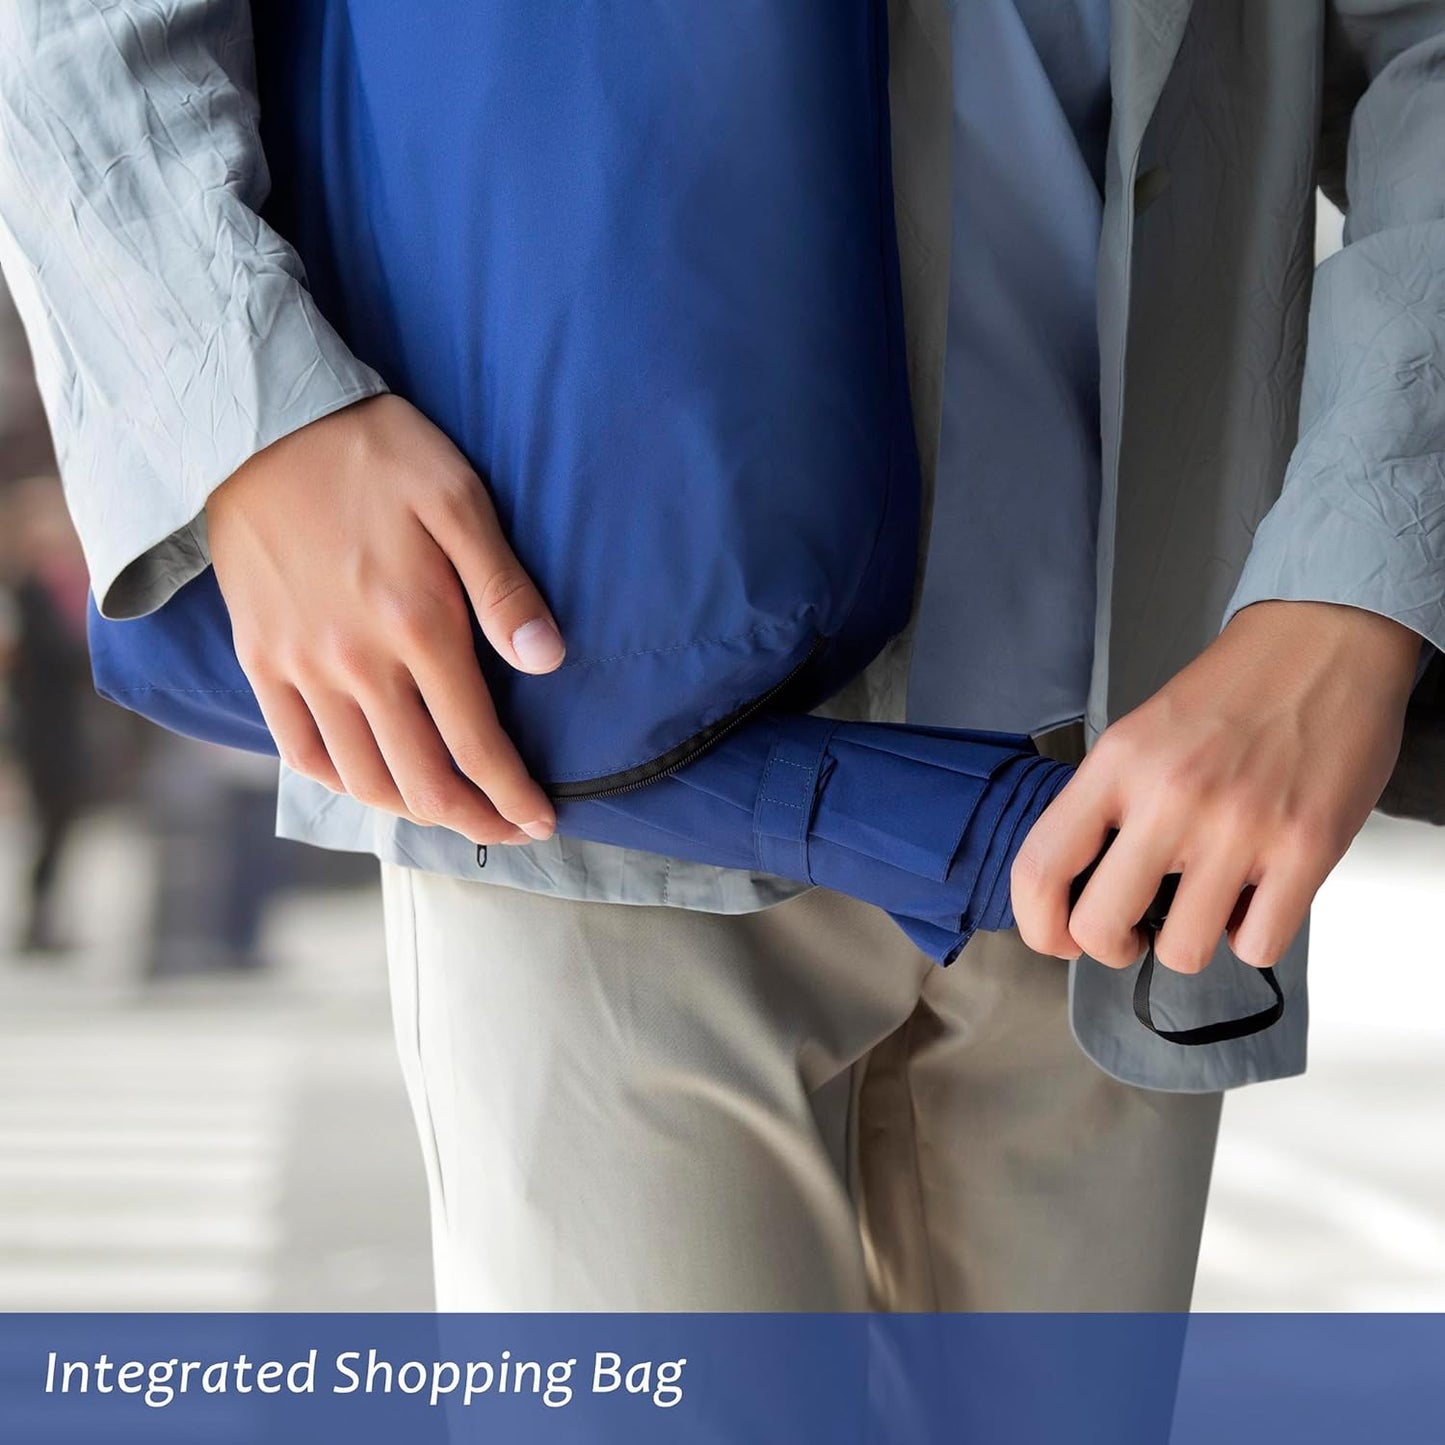 JPAXI 2-in-1 Compact Umbrella & Shopping Bag | Seamless Shift from Rain to Retail